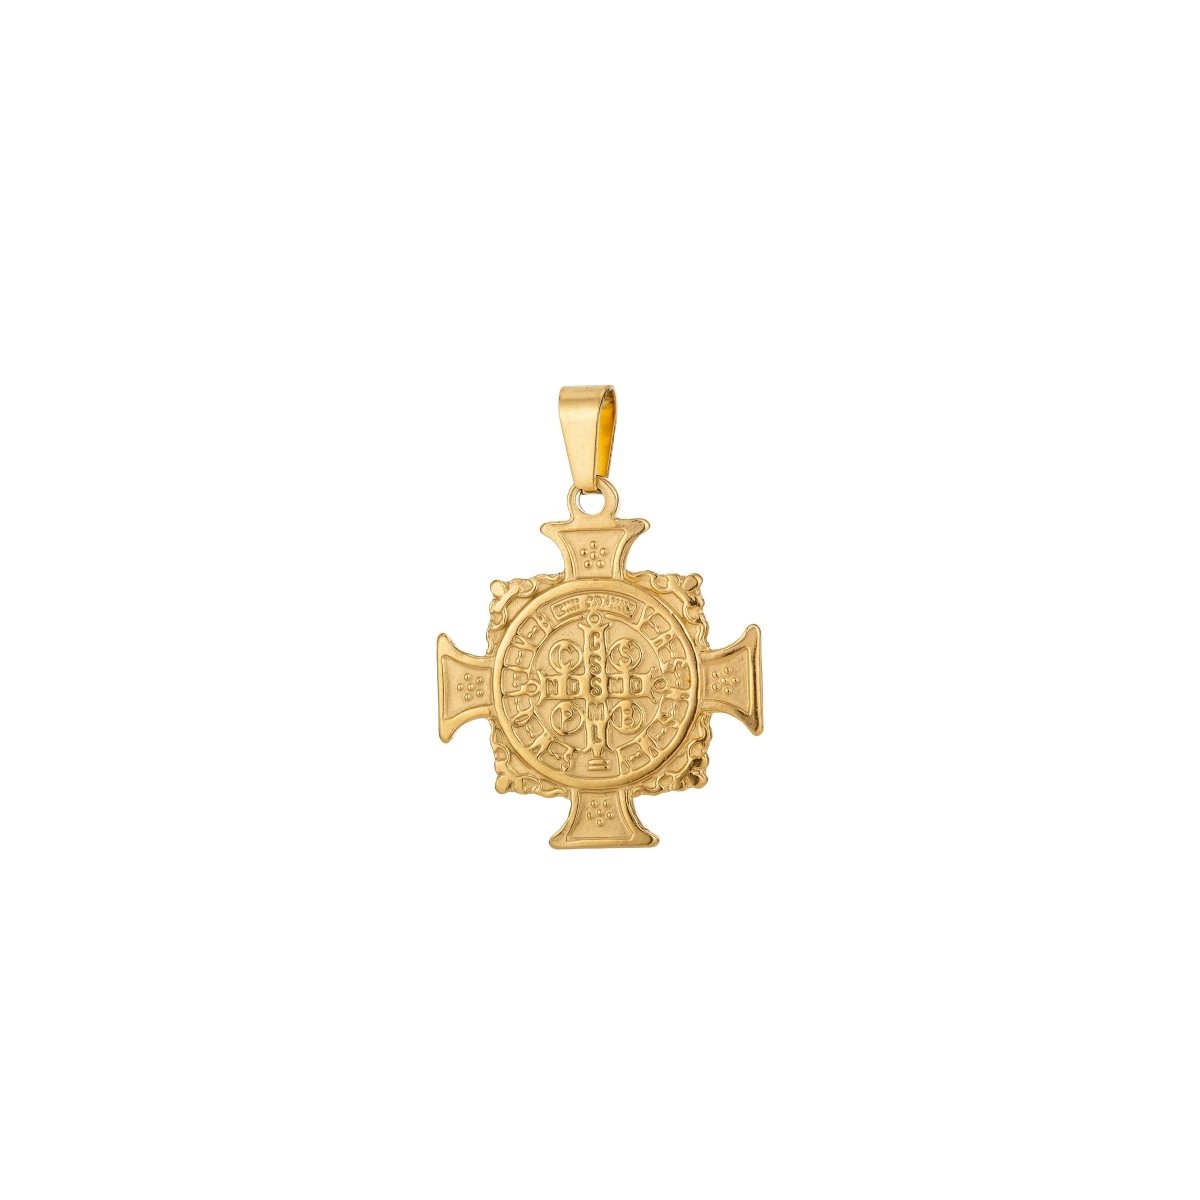 Dainty 18k Gold Filled Saint Benedict Cross Charm Medallion antiquity Pendant Double Sided for Necklace Jewelry Making J-554 J-608 - DLUXCA